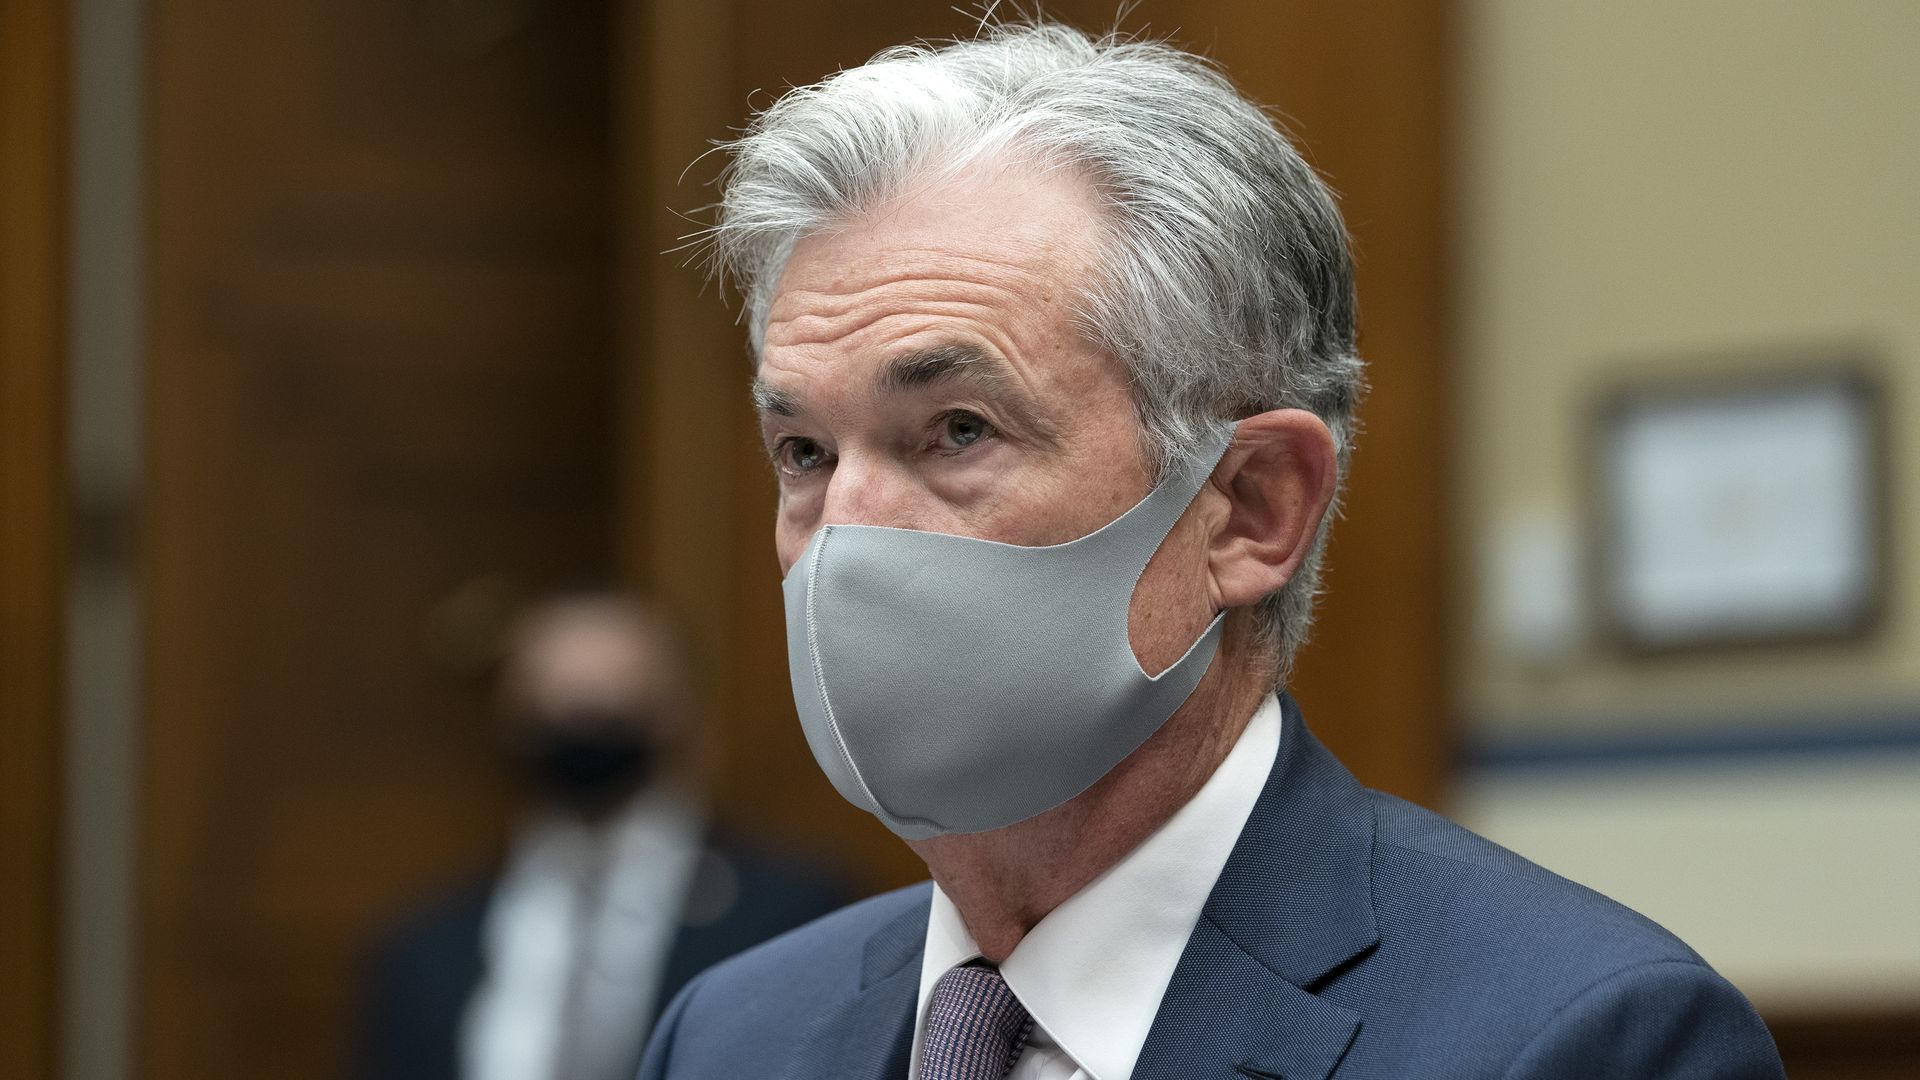 Jerome Powell, chairman of the U.S. Federal Reserve, wears a protective mask during a House Select Subcommittee on the Coronavirus Crisis hearing 